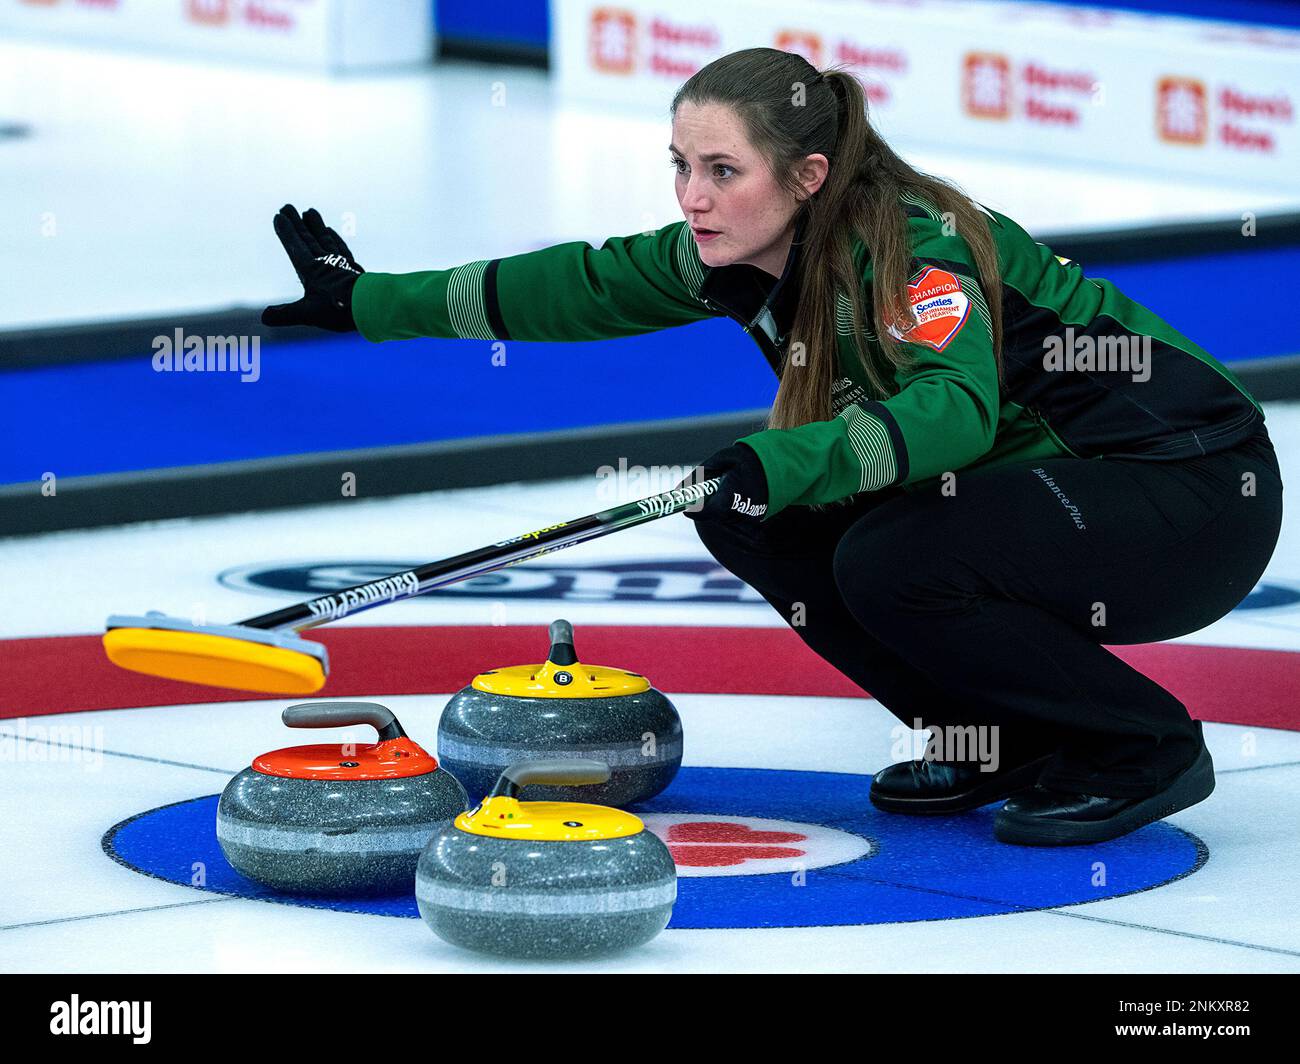 Saskatchewan skip Penny Barker directs her sweepers as they play against Wild Card 3 at the Scotties Tournament of Hearts curling event in Thunder Bay, Ontario, Thursday, Feb